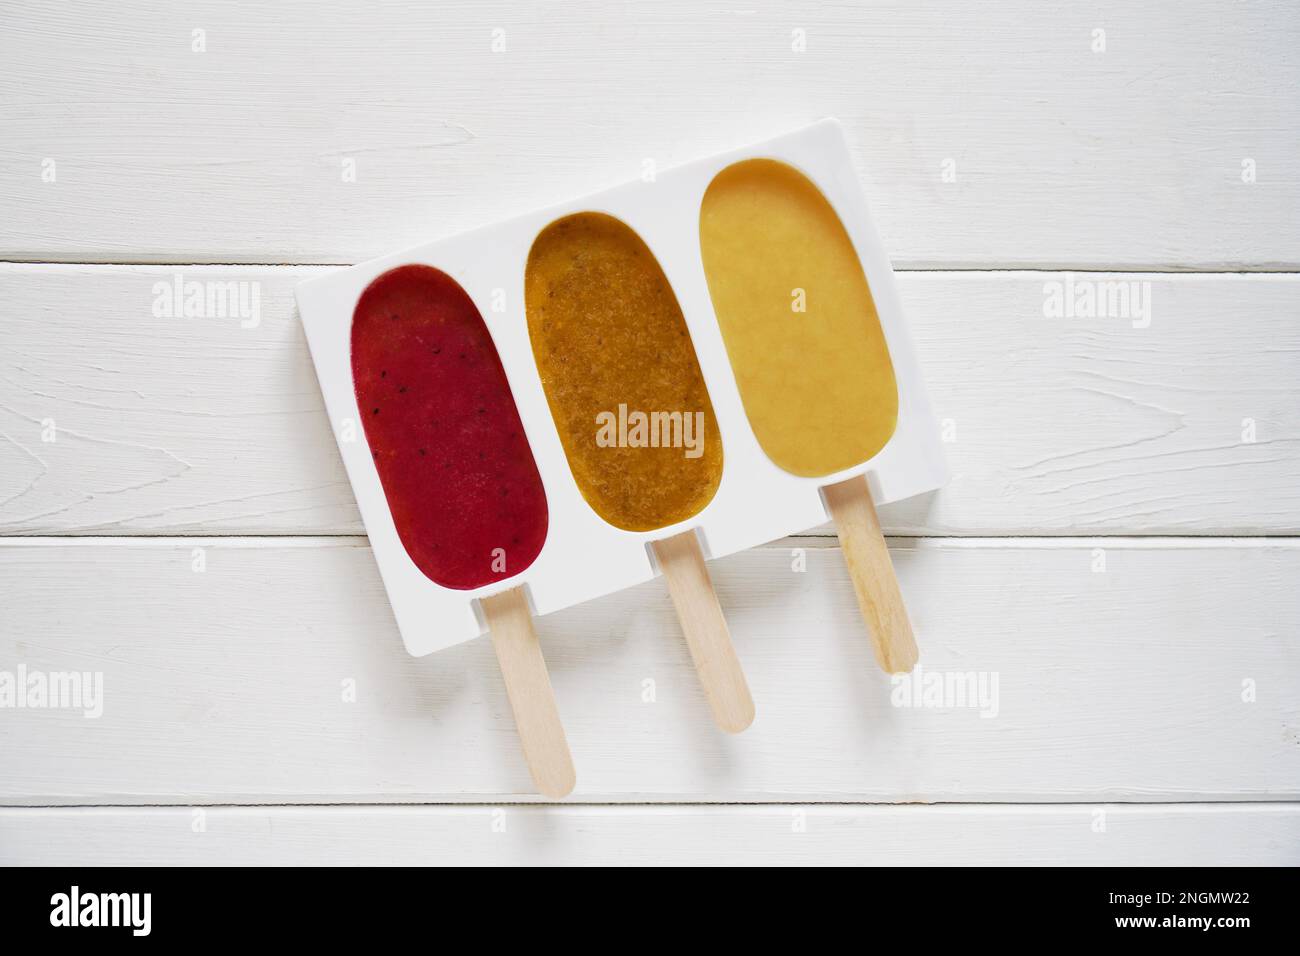 https://c8.alamy.com/comp/2NGMW22/three-different-fruit-smoothie-popsicles-in-reusable-silicone-ice-pop-mold-or-form-on-white-wooden-background-making-strawberry-passion-fruit-and-2NGMW22.jpg